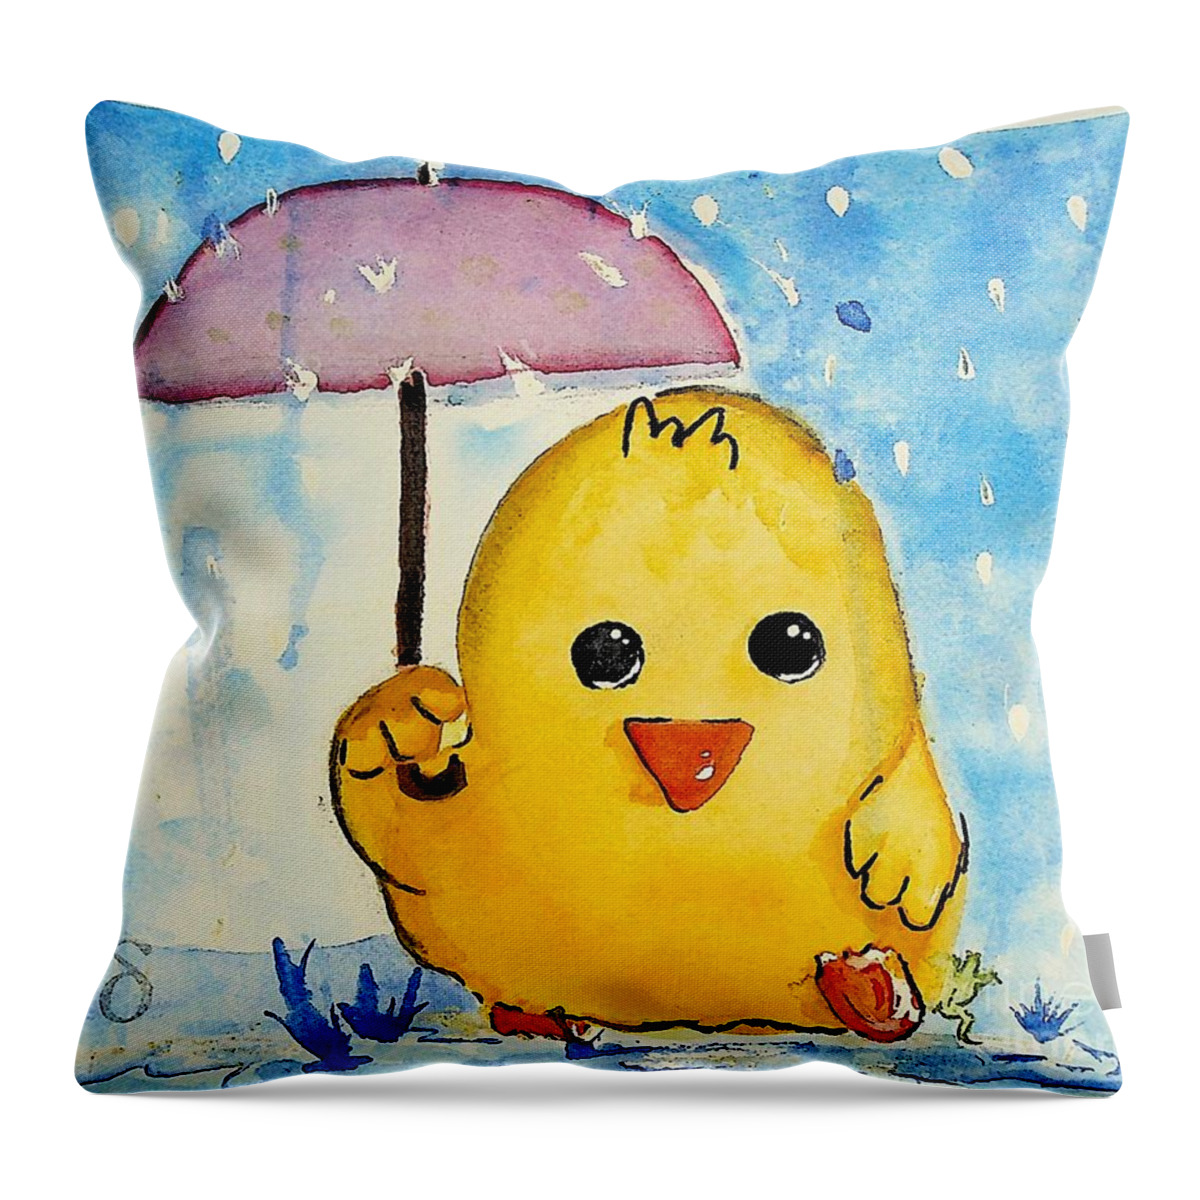 Happy Throw Pillow featuring the painting Happy Duckie Spring by Valerie Shaffer